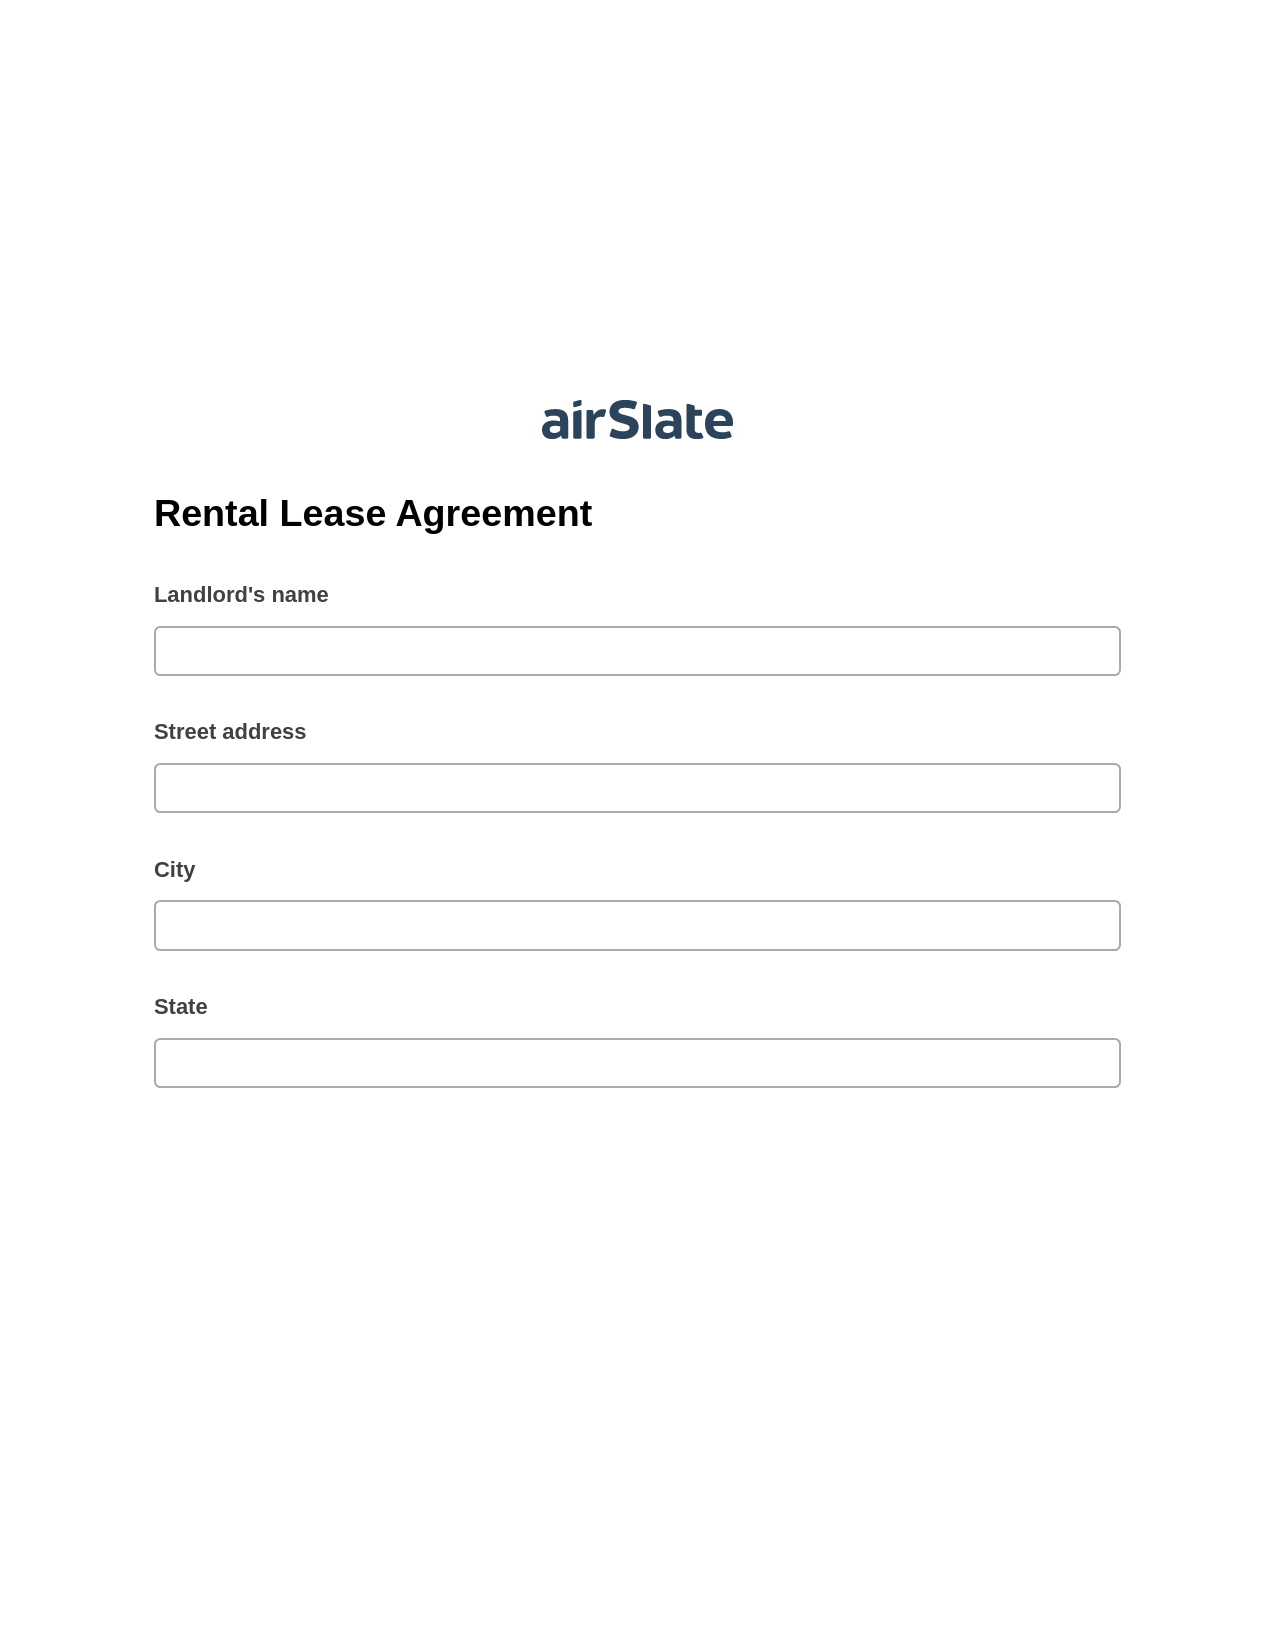 Multirole Rental Lease Agreement Pre-fill from MySQL Dropdown Options Bot, Jira Bot, Export to Excel 365 Bot